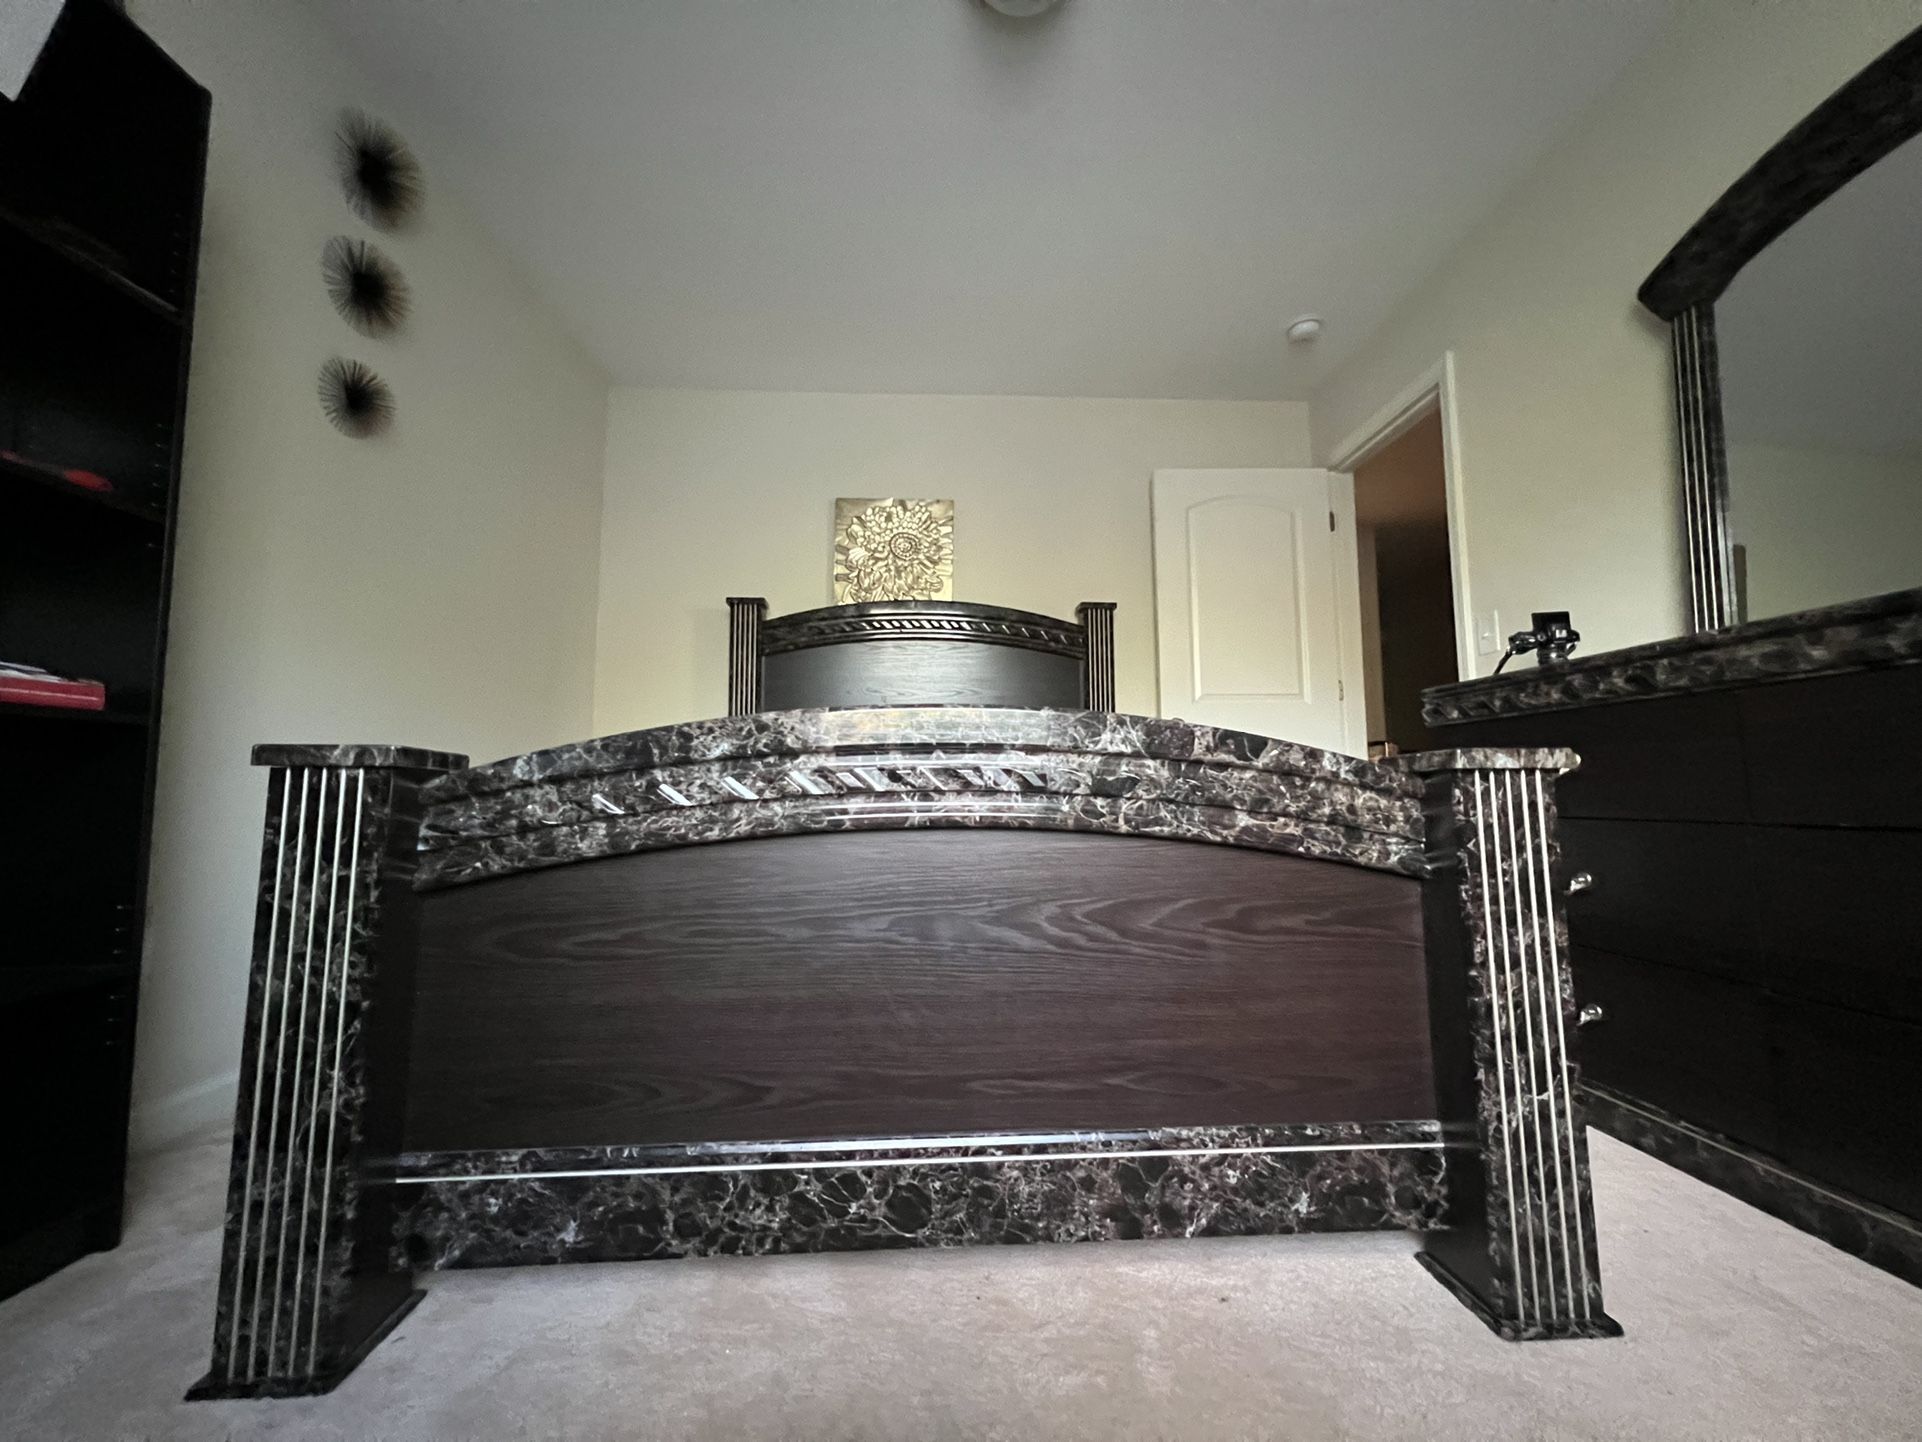 Queen size bed frame and dresser set